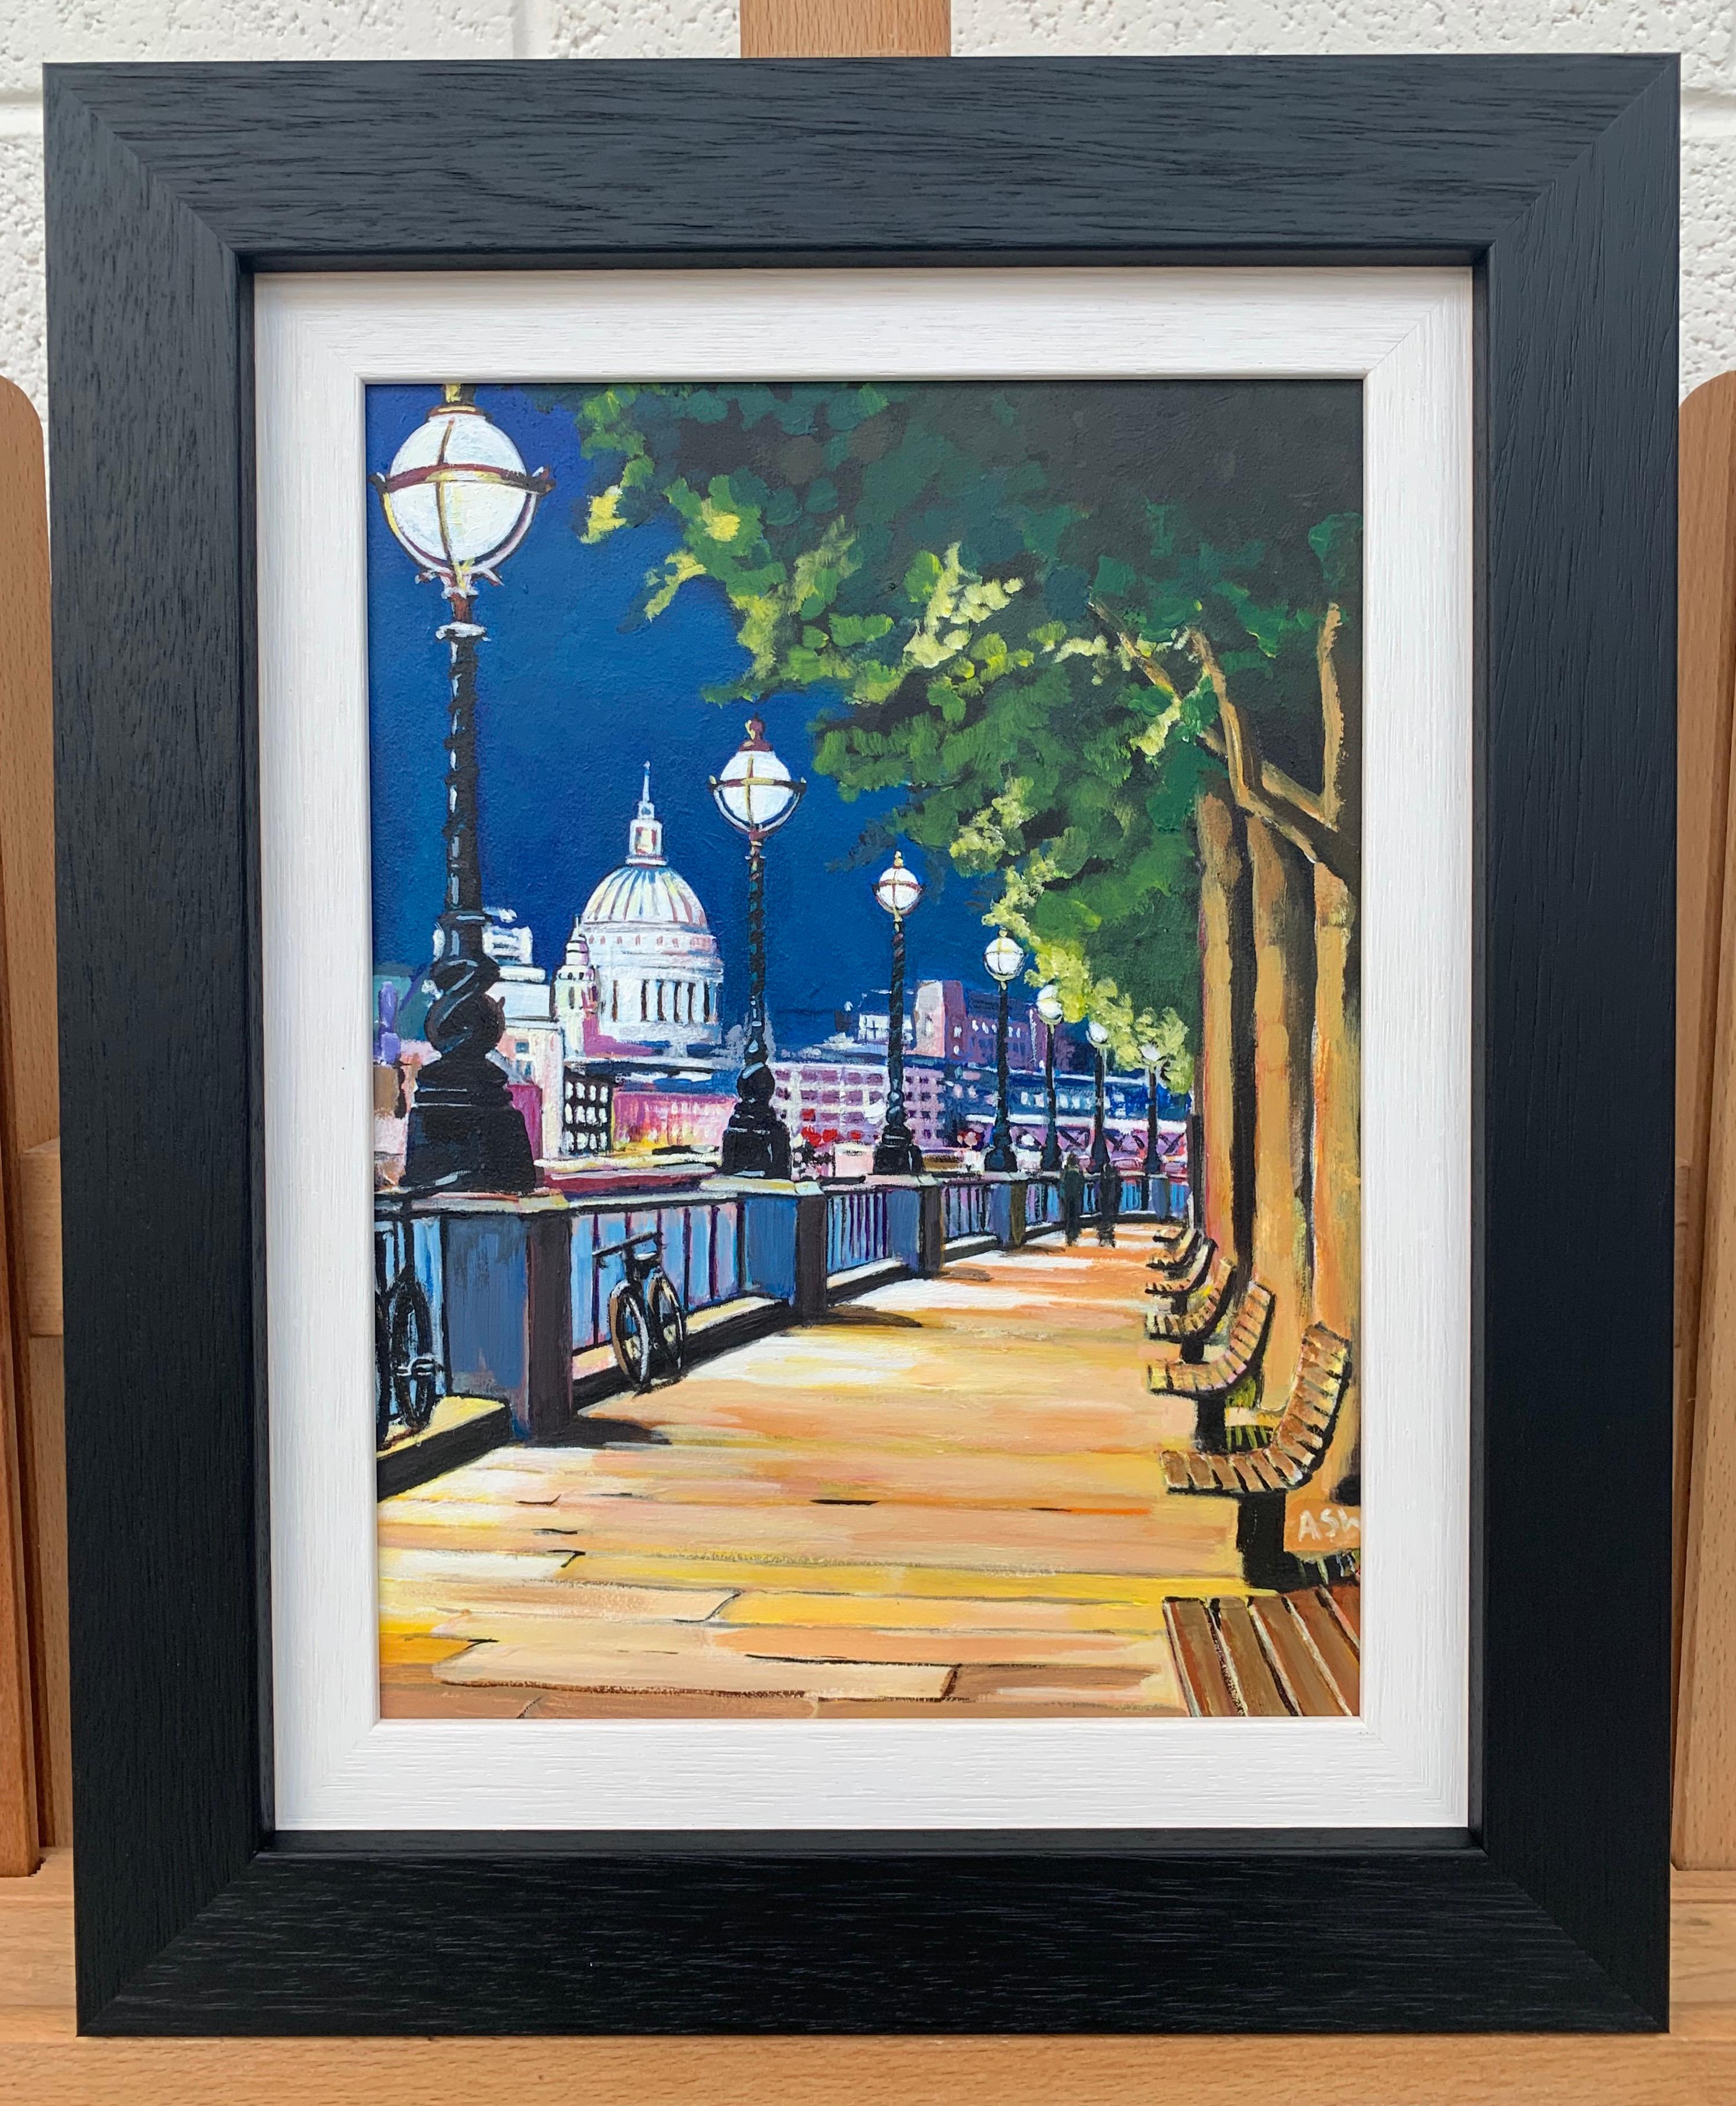 Painting of Victoria Embankment with St Paul's Cathedral, City of Westminster, London - a unique original from leading British Cityscape Artist, Angela Wakefield.

Art measures 8.5 x 11.75 inches
Frame measures 13.5 x 16.75 inches

Angela Wakefield